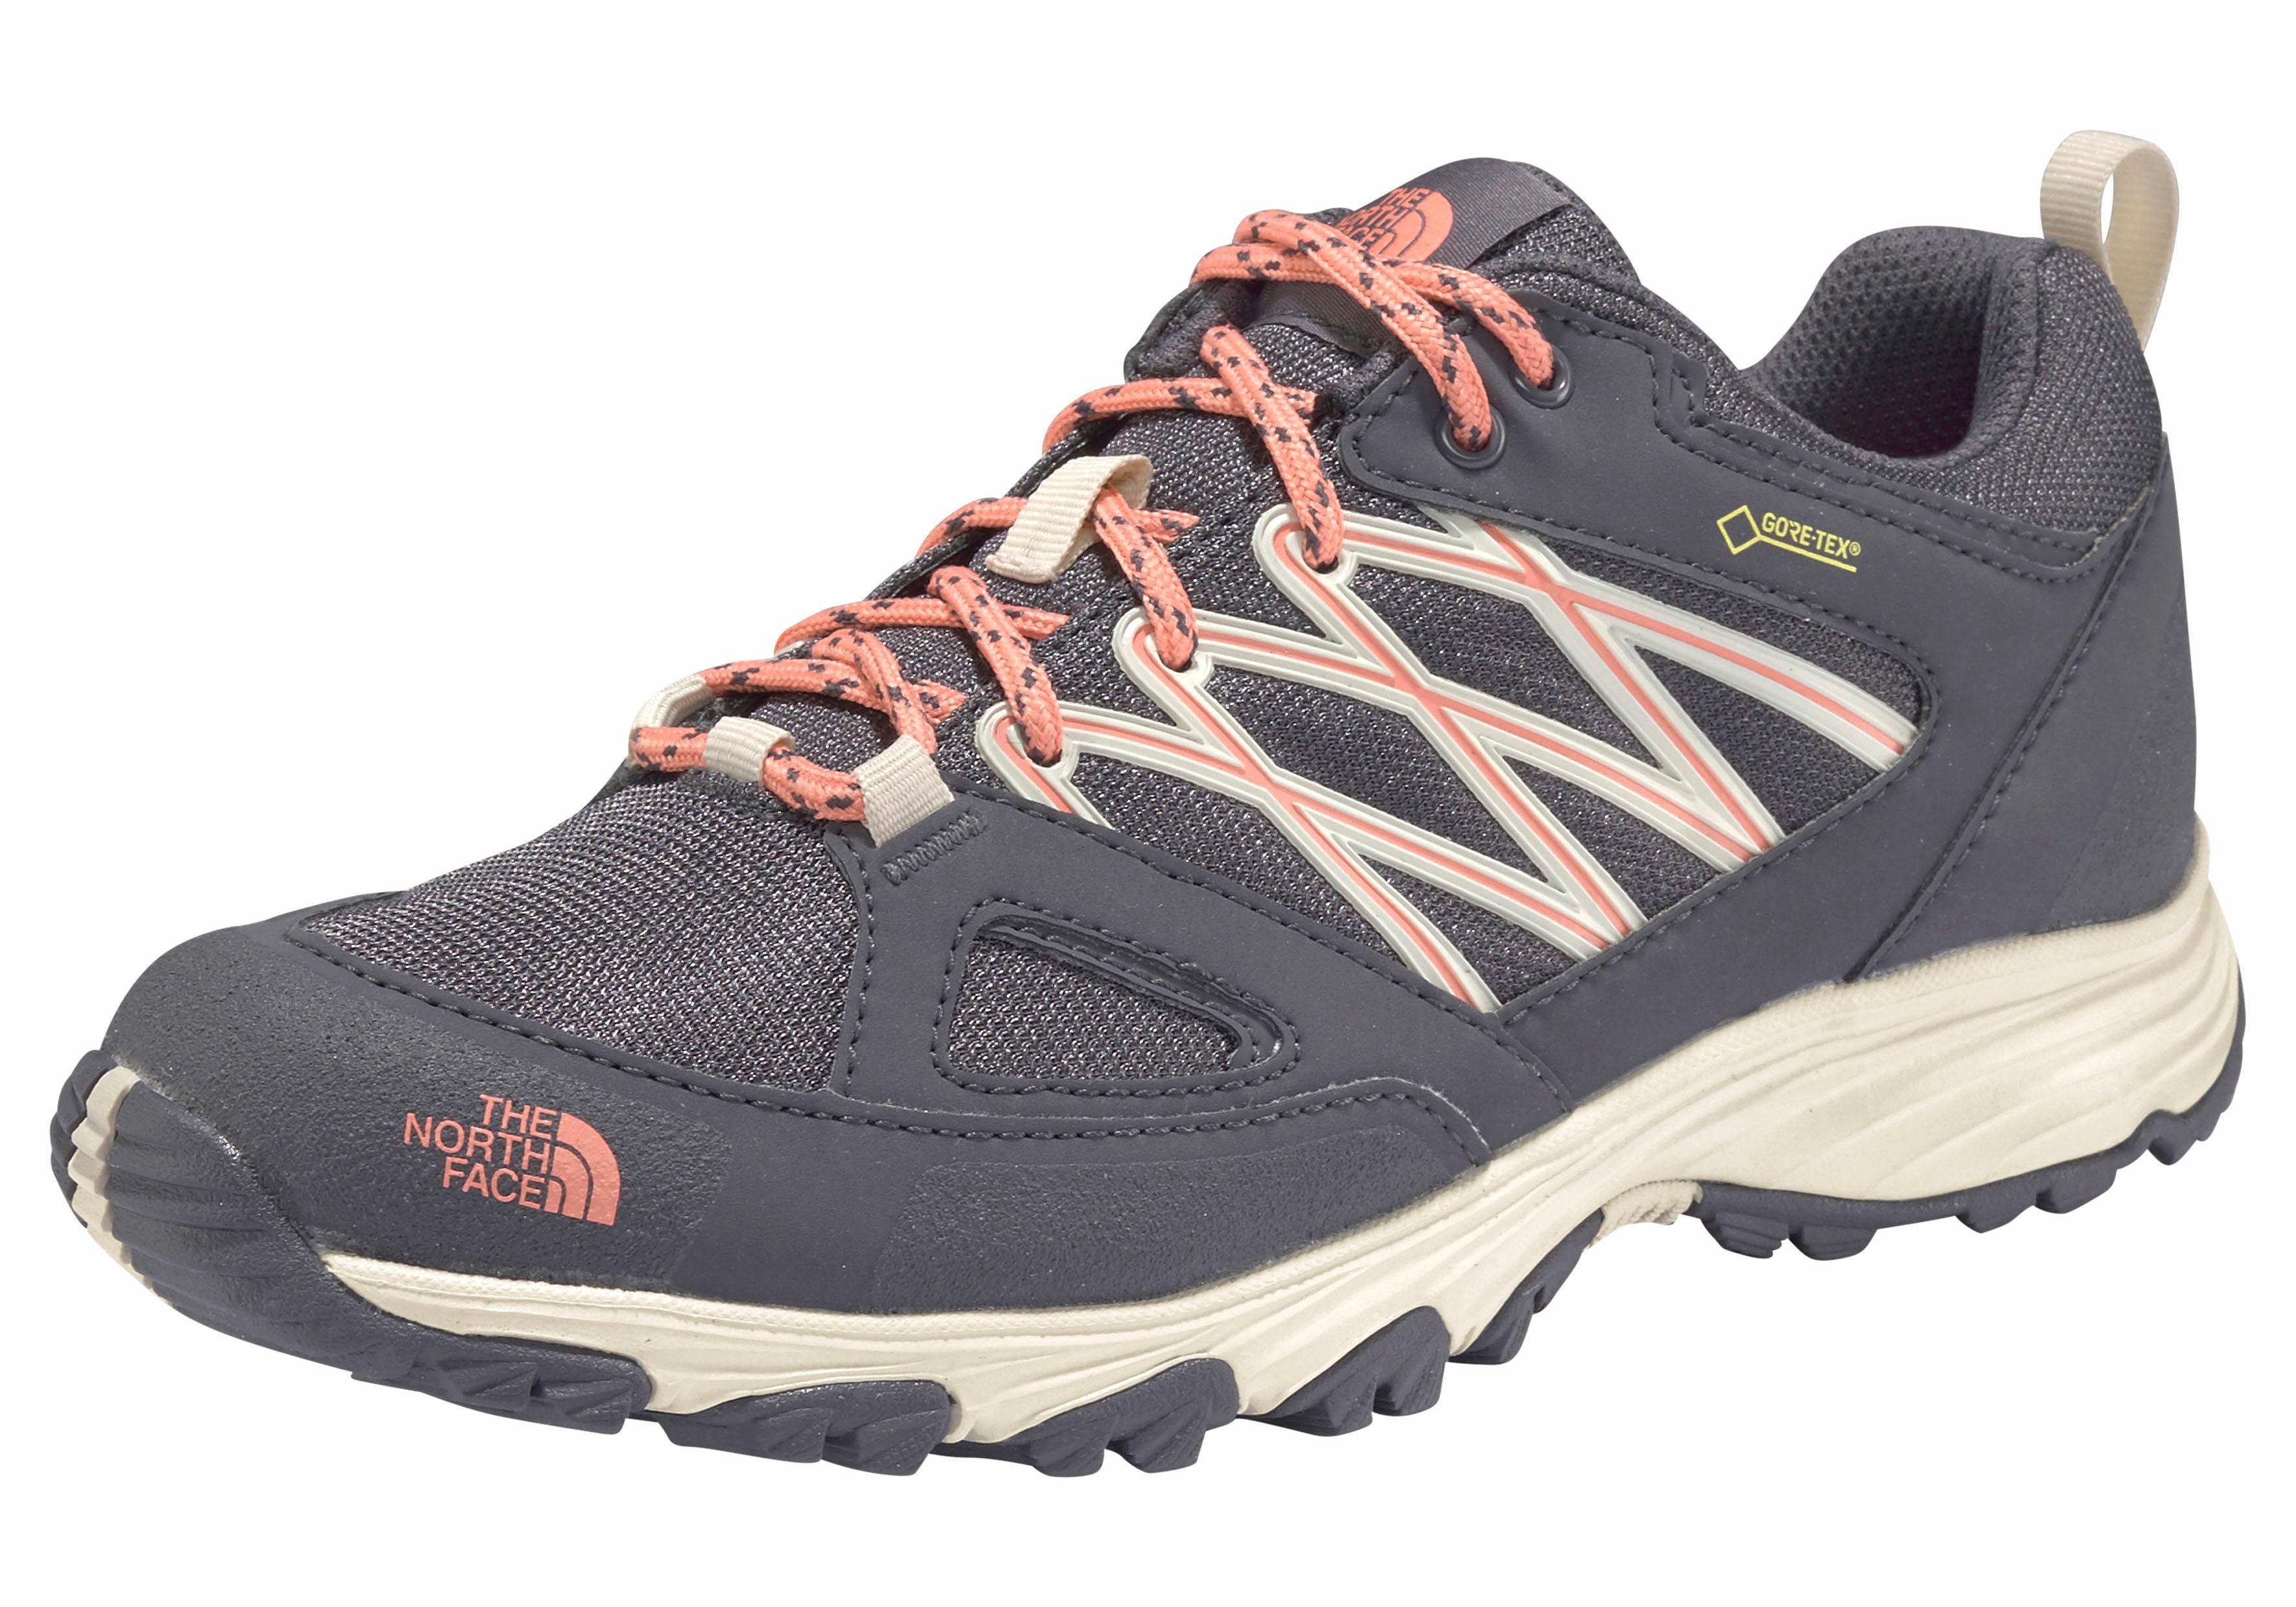 Otto - The North Face NU 15% KORTING: The North Face outdoorschoenen Wmns Venture Fastpack II Goretex